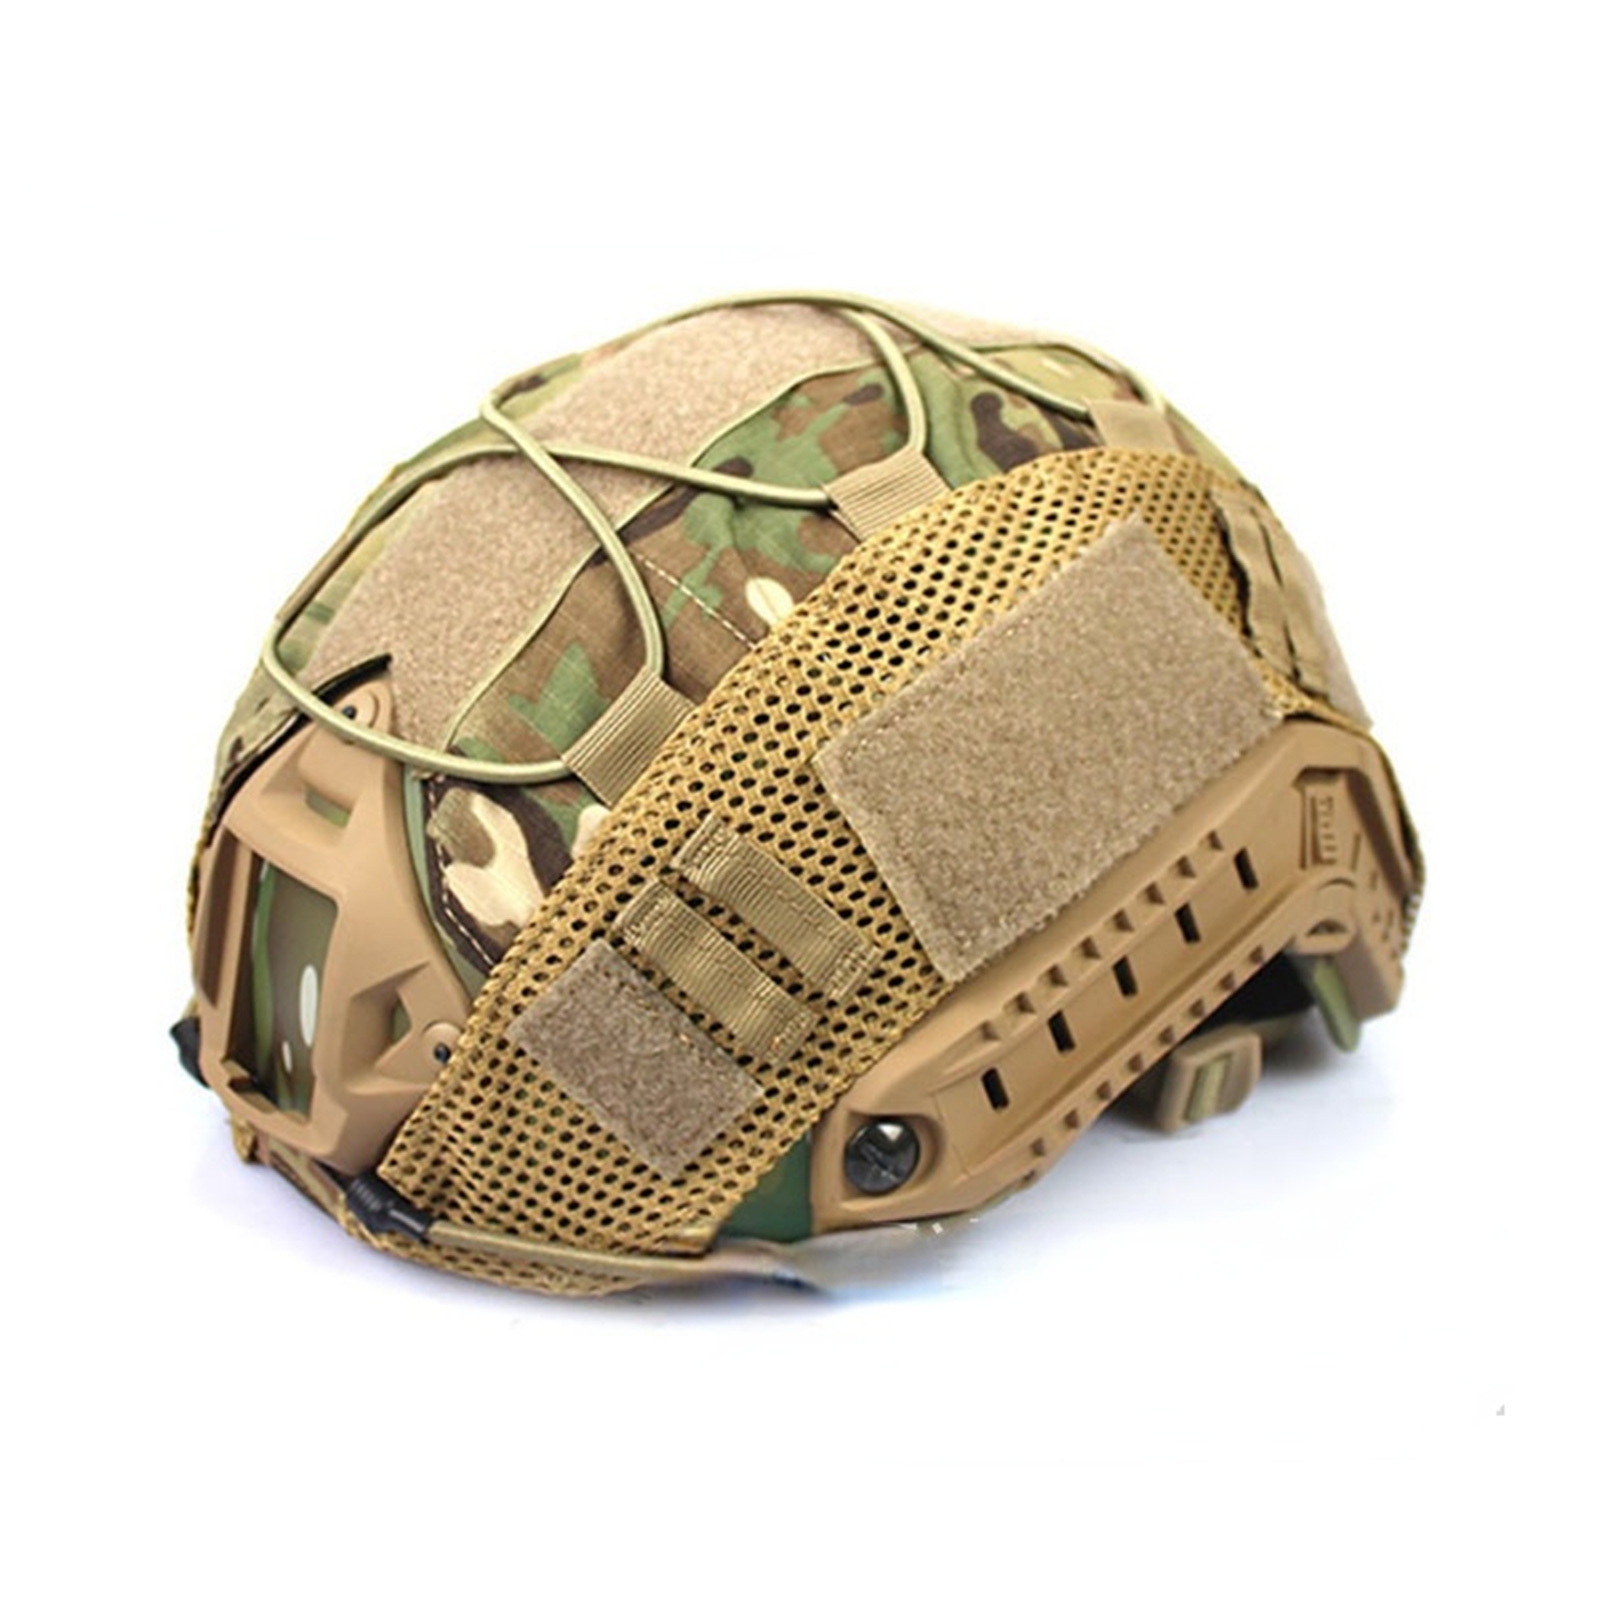 Camouflage Helmet Cover With Quick Adjustable Buckle Airsoft Helmet Case Outdoor Equipment (helmet Not Included) A1